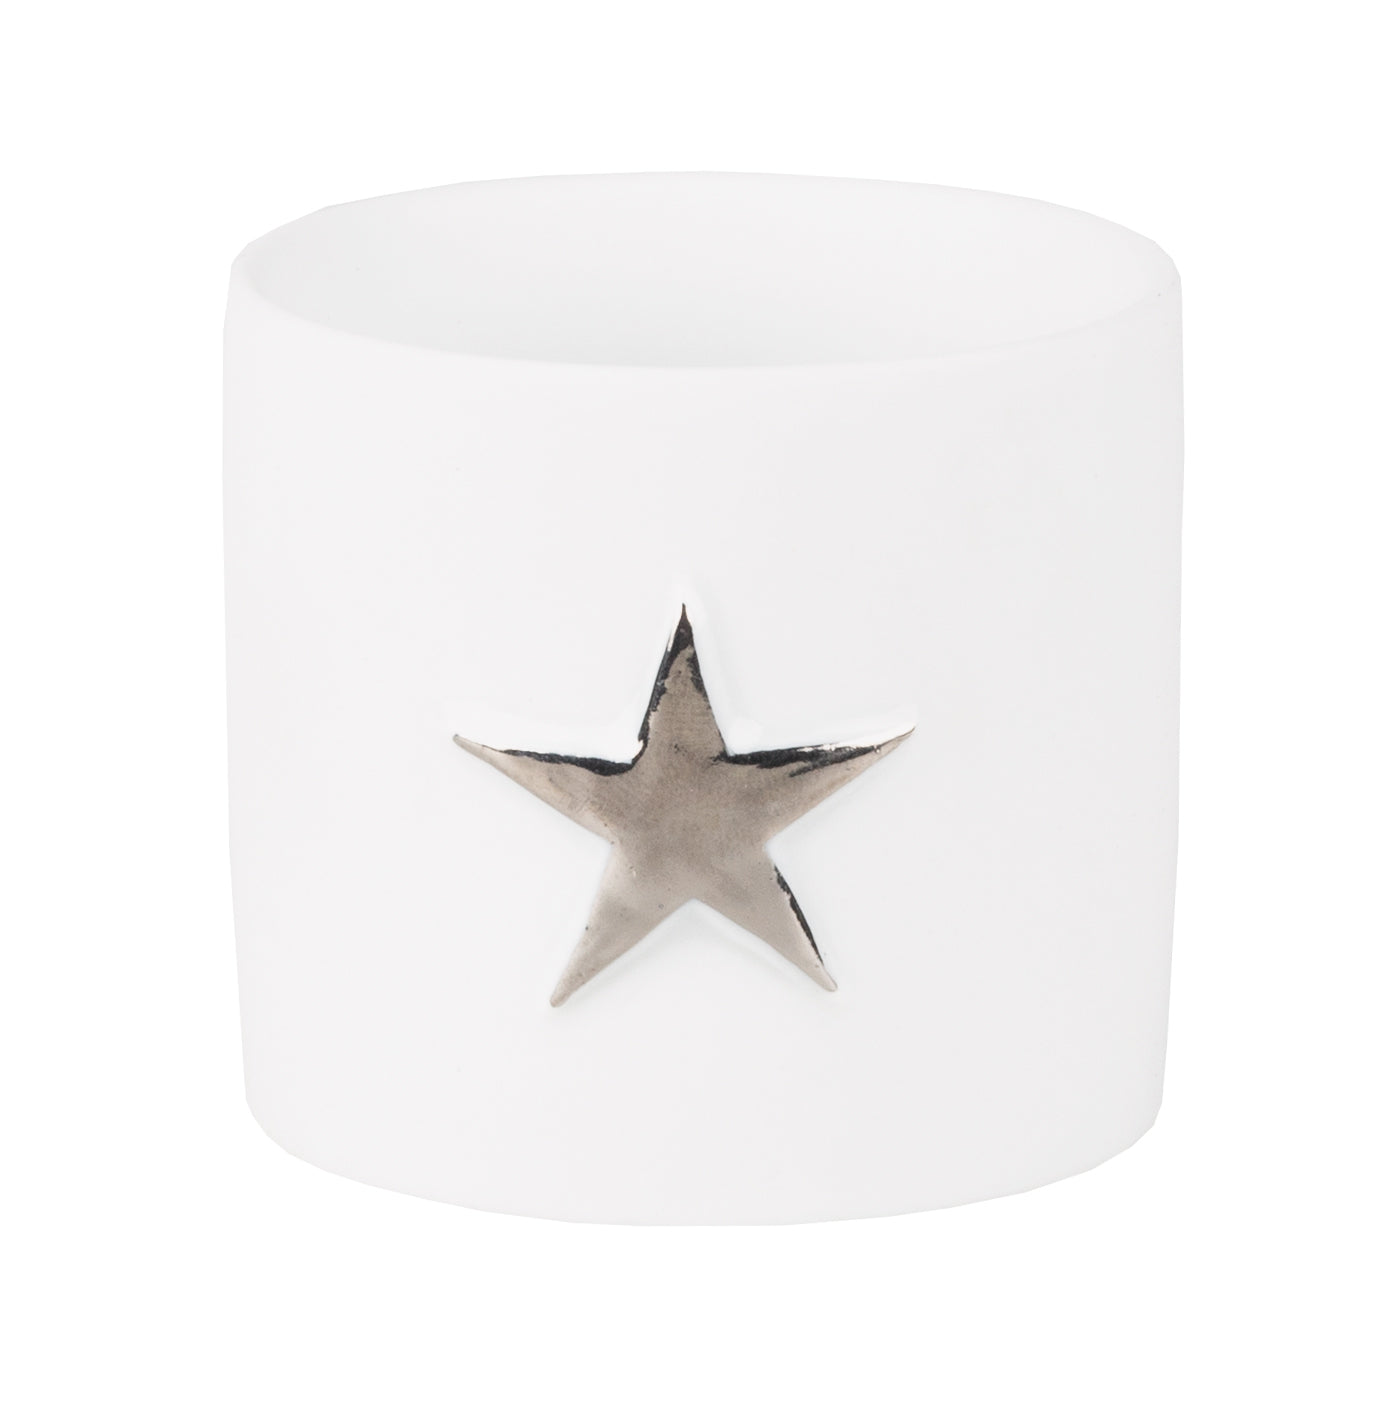 Star Tealight Holders - Set of 2 | Gold or Silver